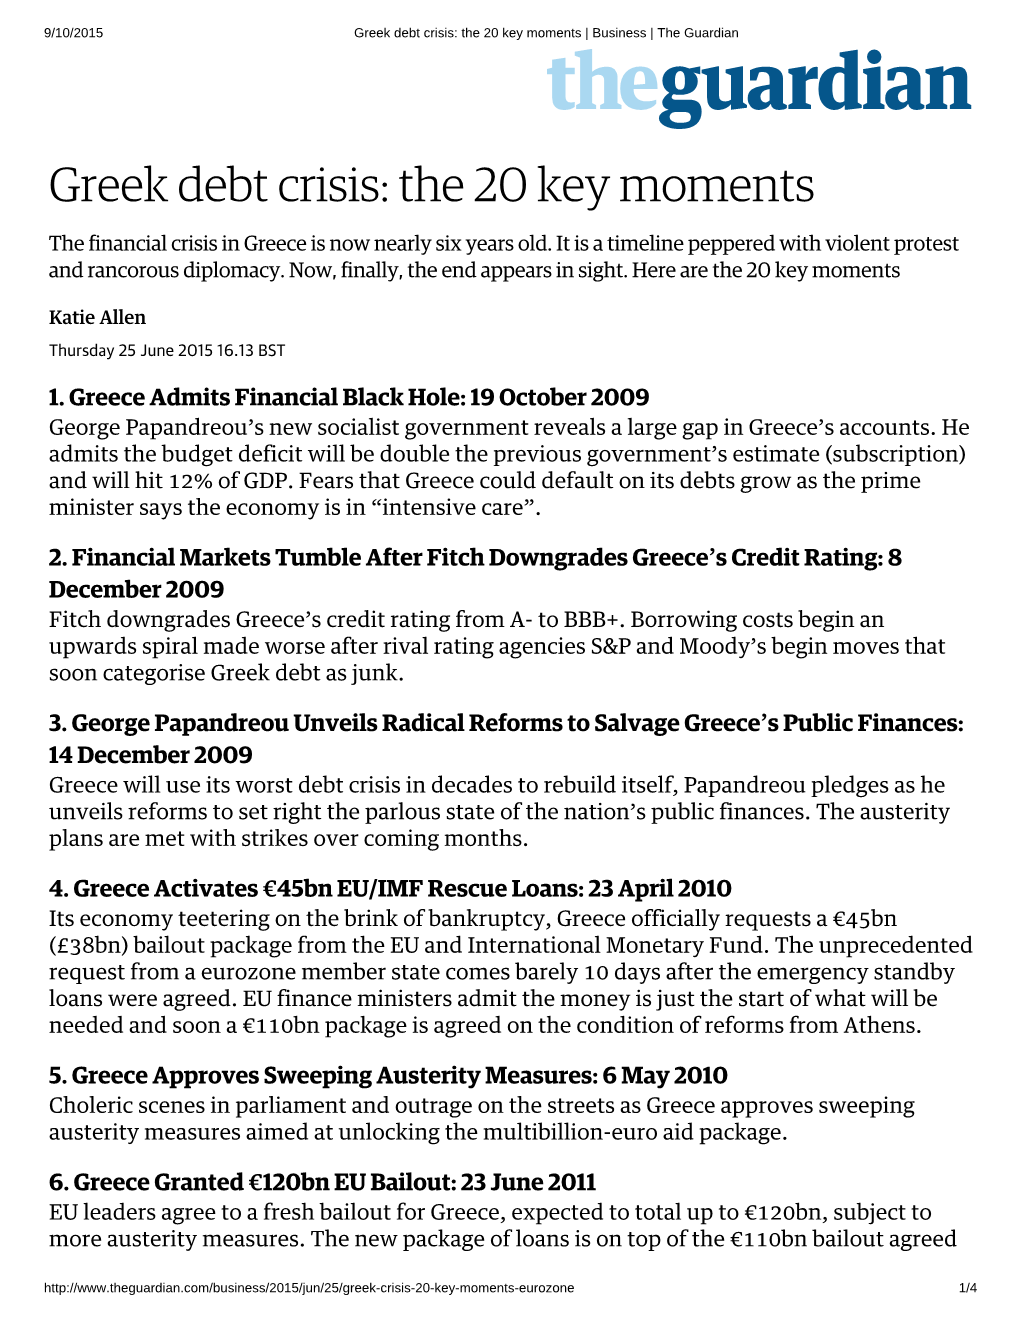 Greek Debt Crisis: the 20 Key Moments | Business | the Guardian